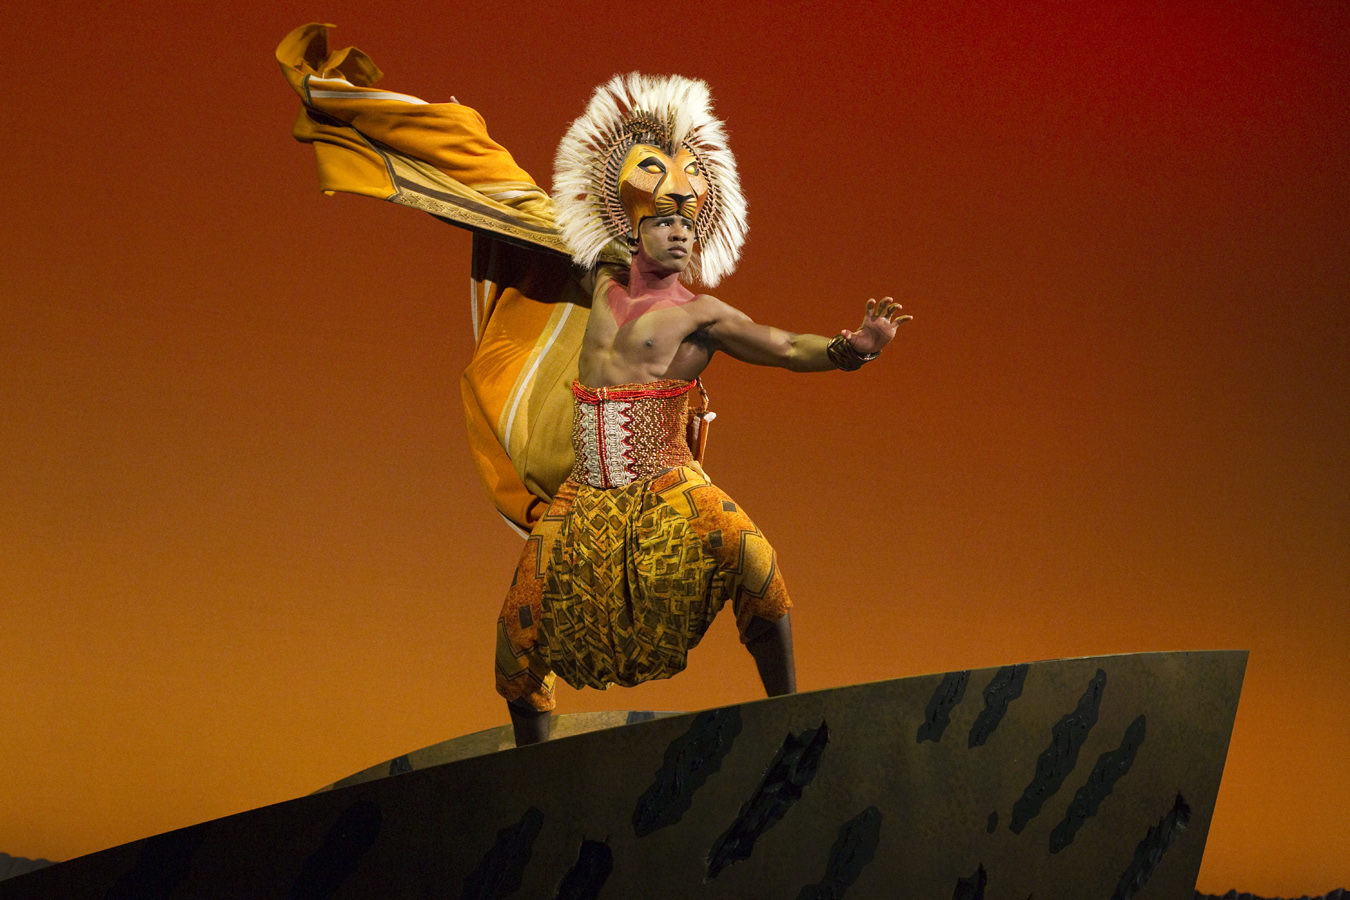 The Lion King at Spark Arena